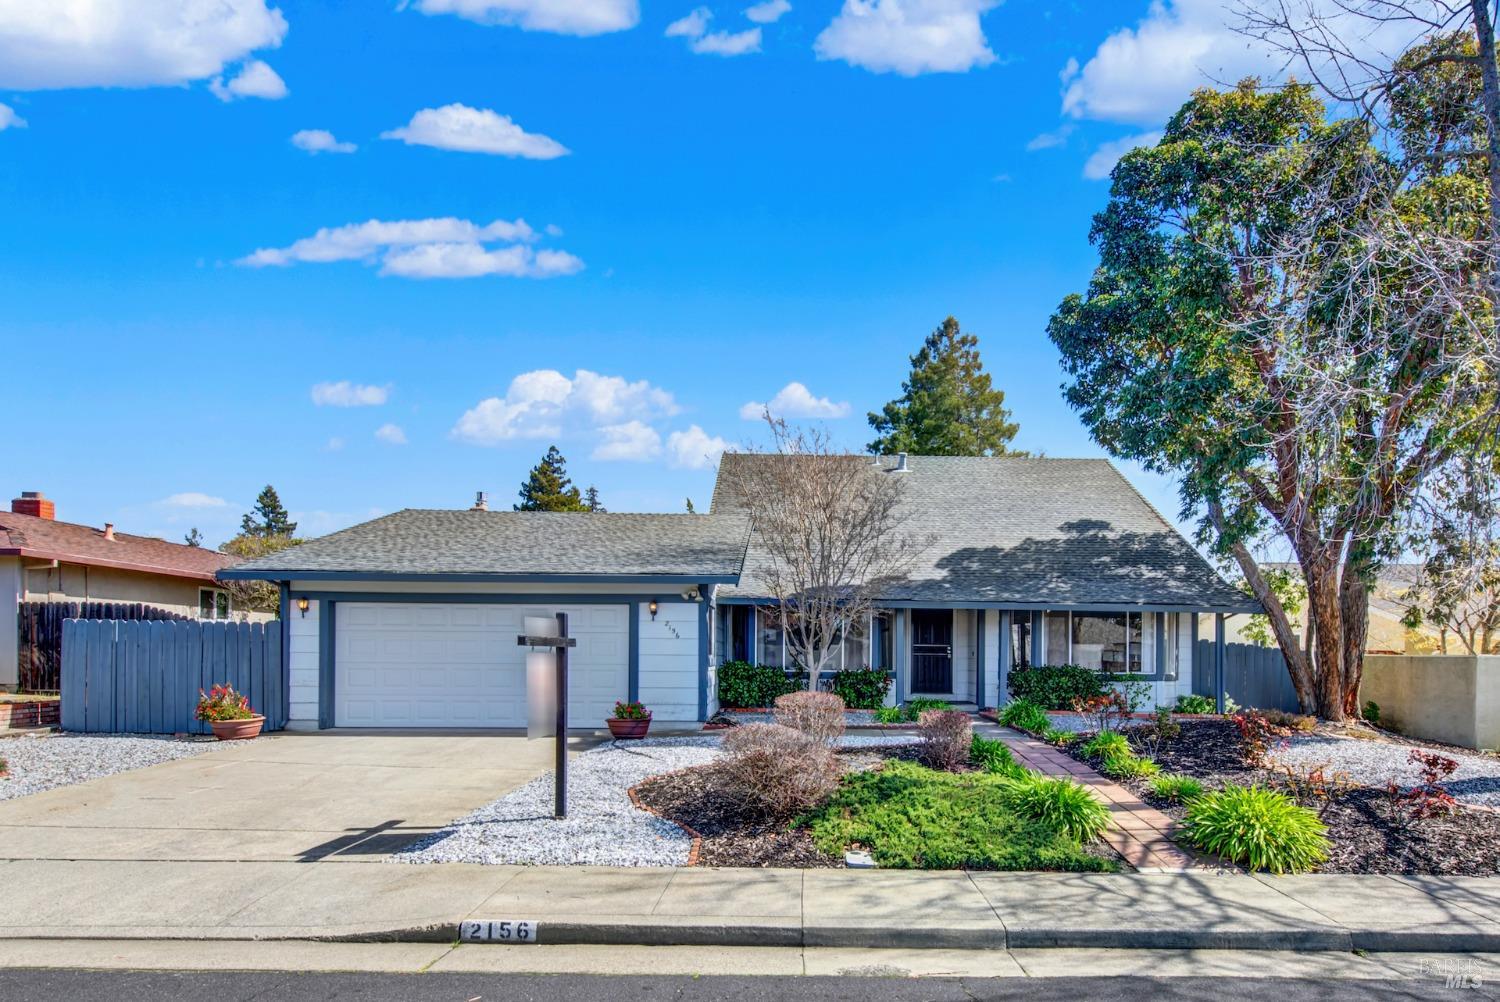 Photo of 2156 Monterey Dr in Fairfield, CA